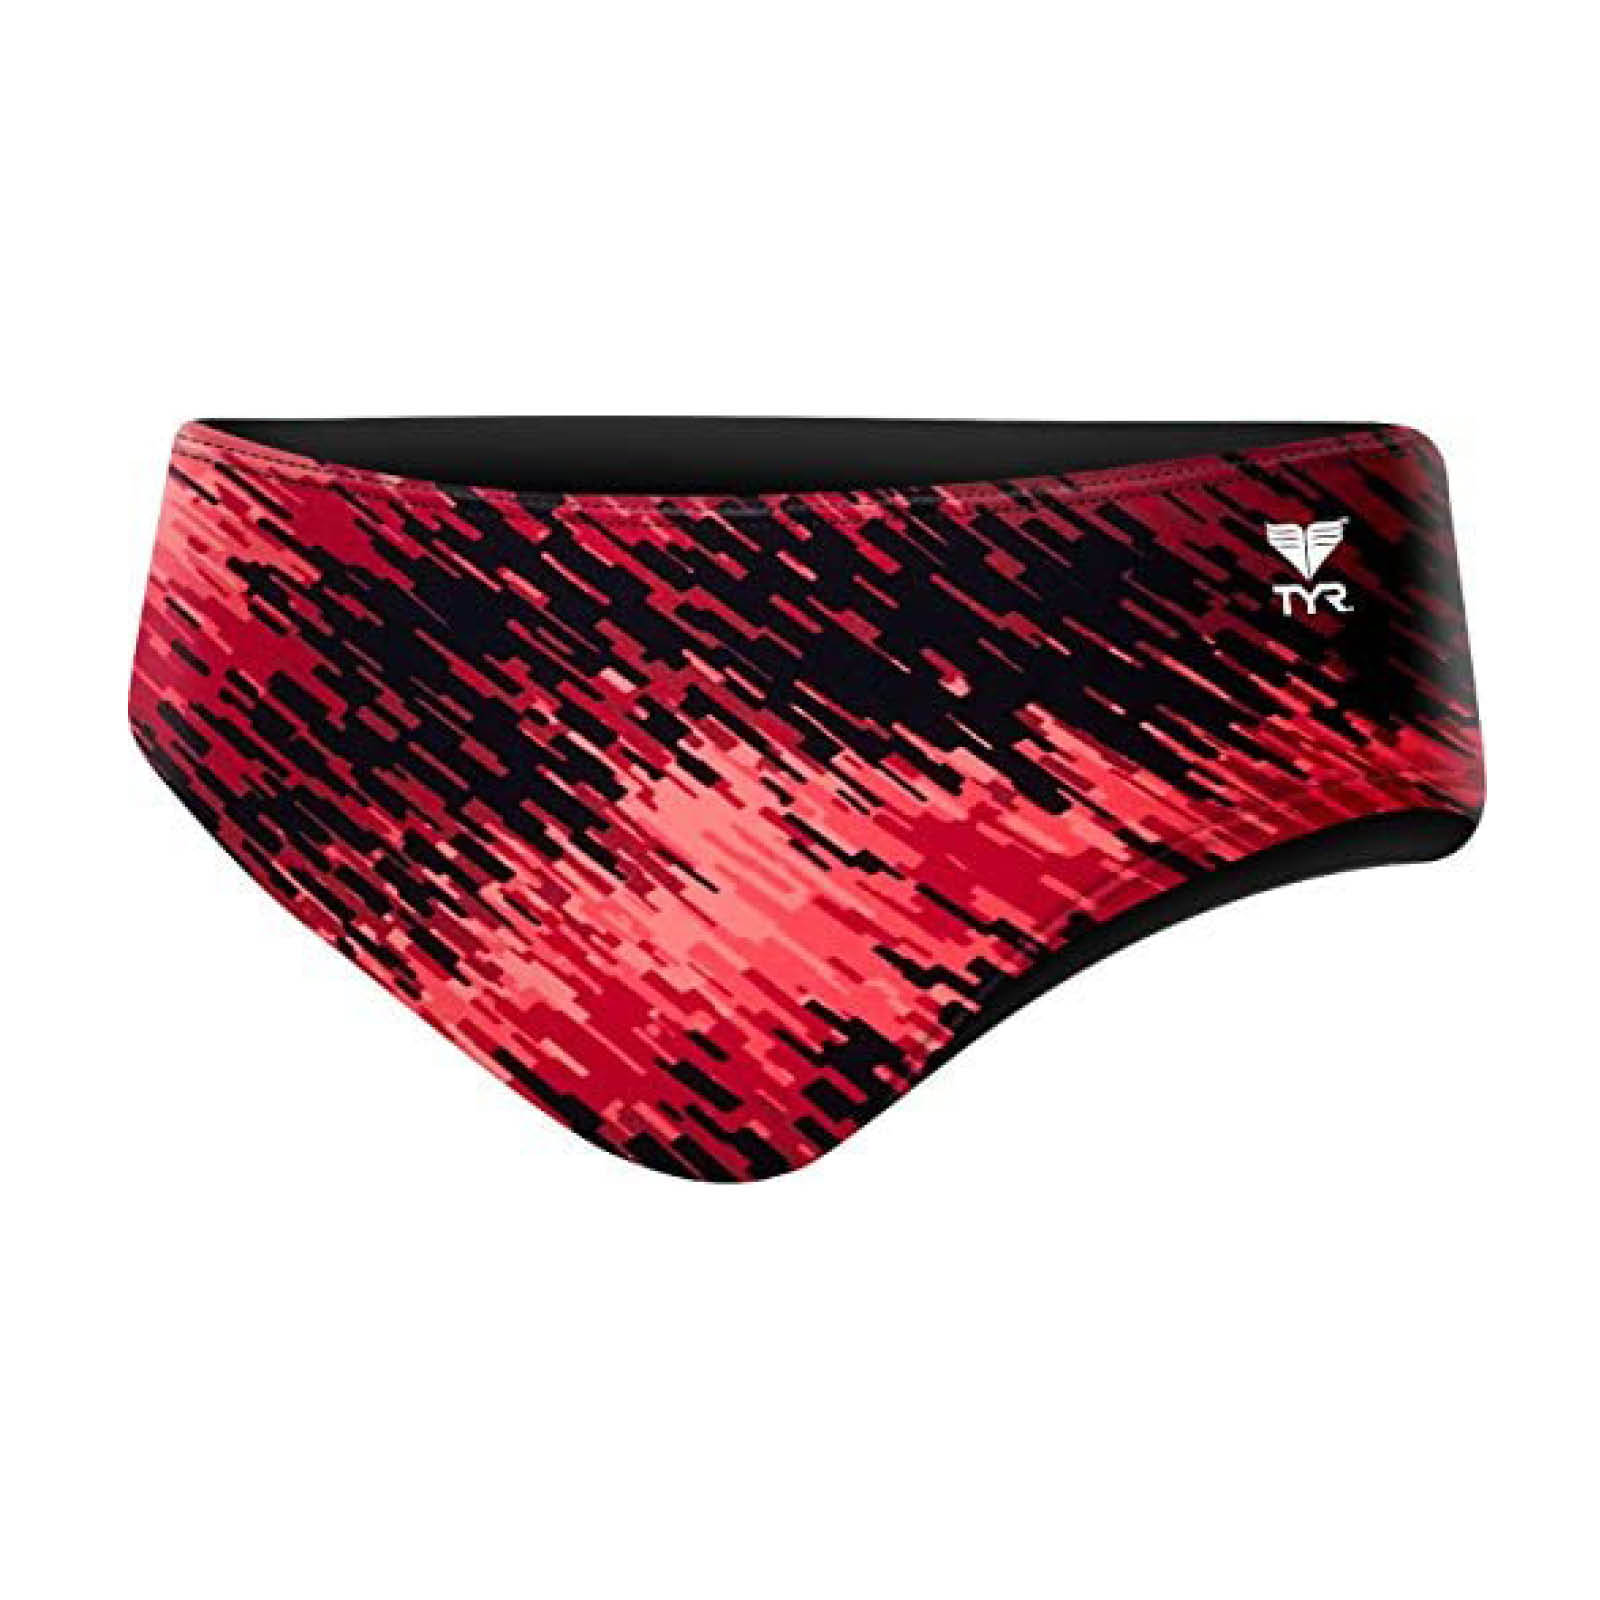 Tyr - PERSEUS ALL OVER RACER - RED